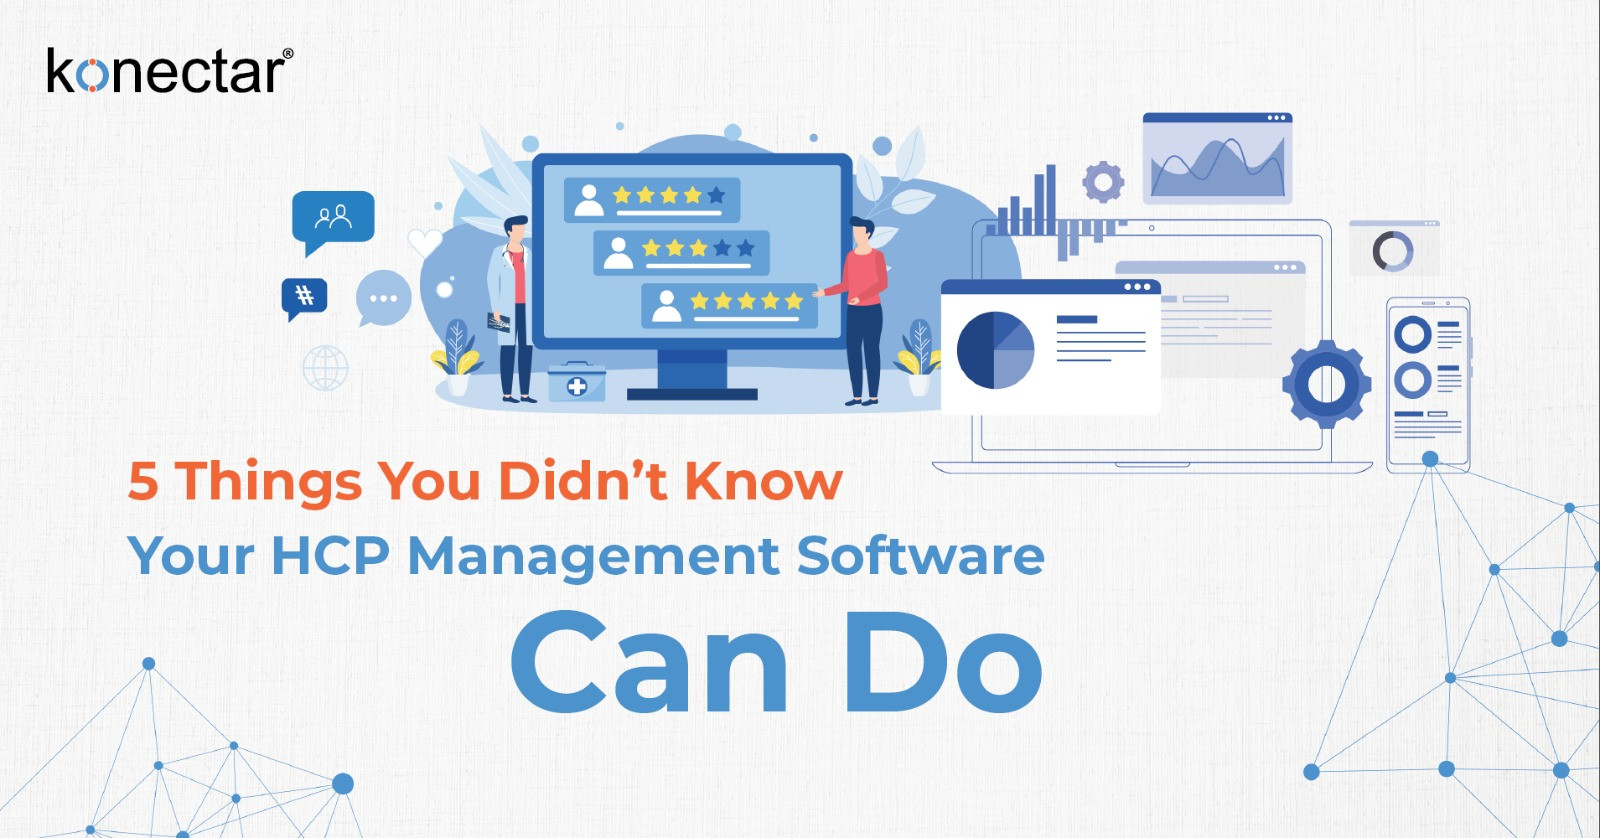 5 Things You Didn't Know Your HCP Management Software Can Do